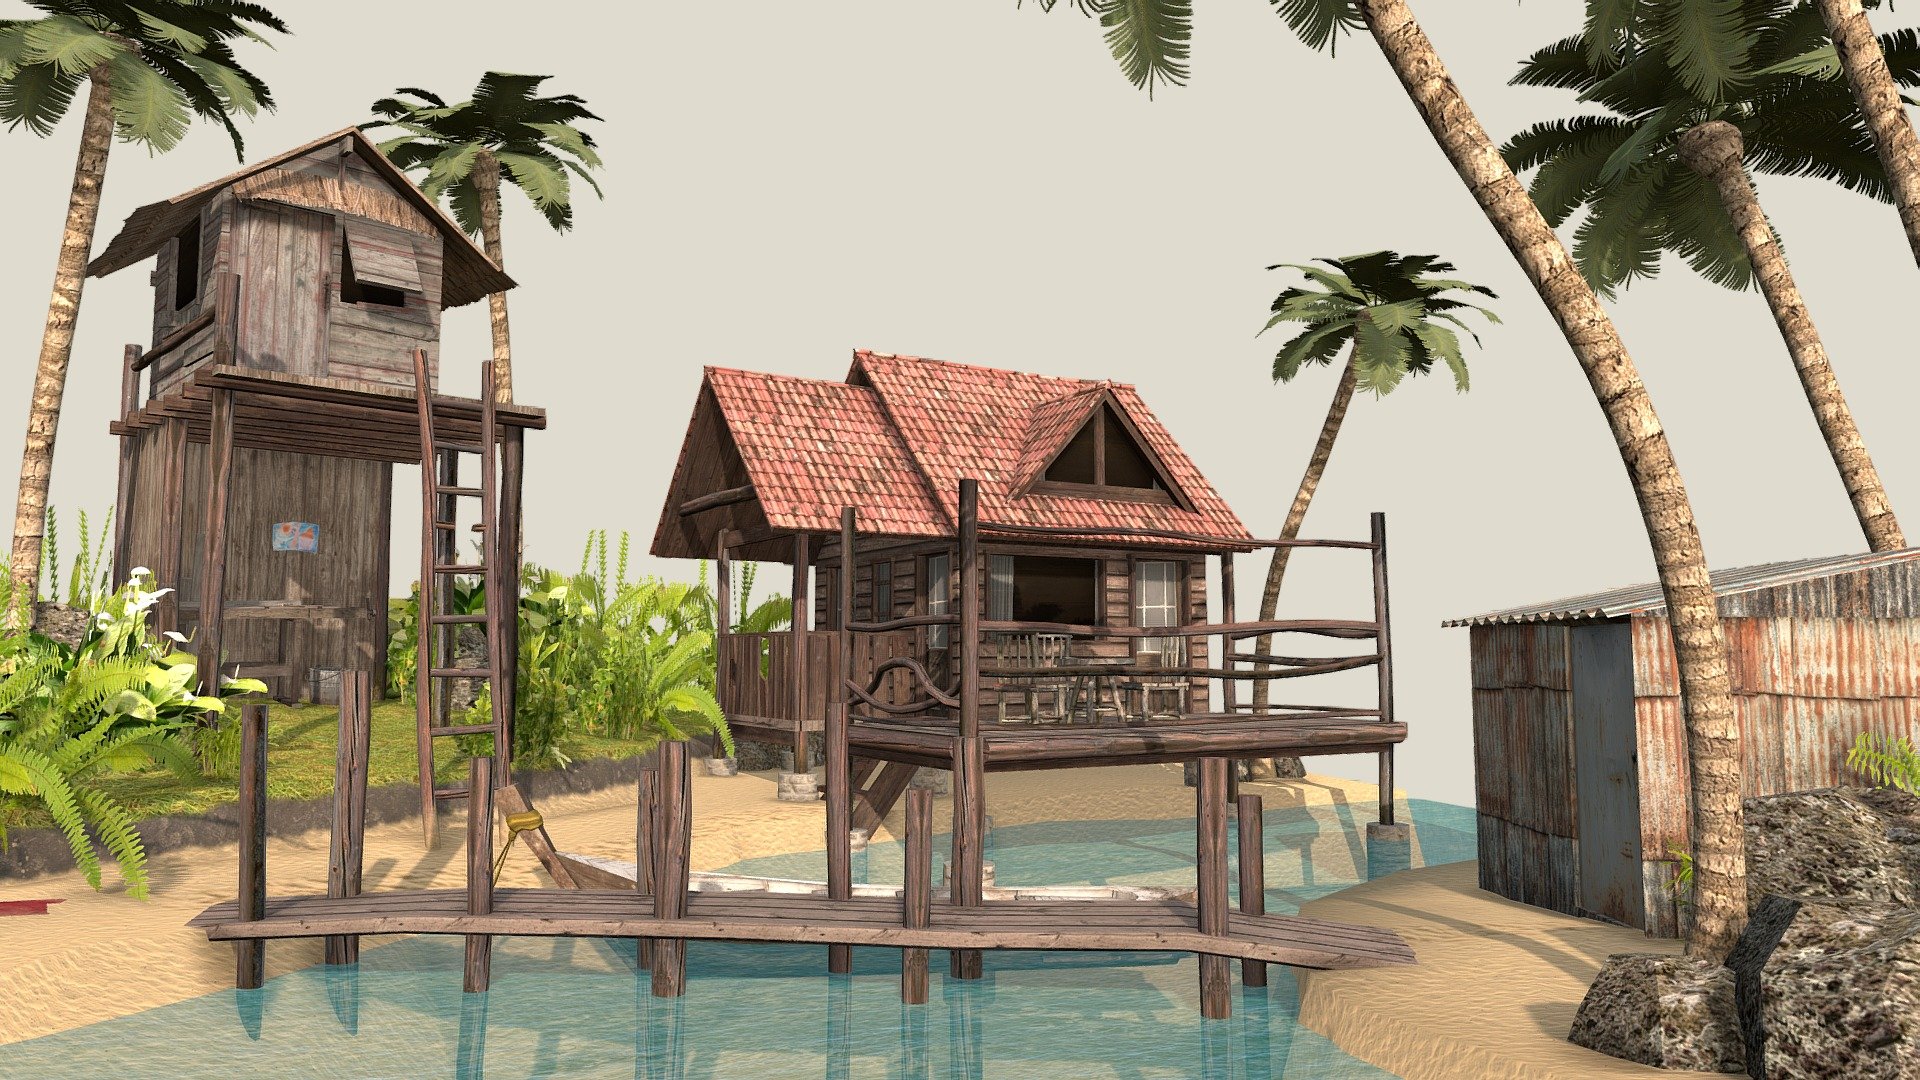 A tropical diorama scene inspired by Thailand. 
Created as a final assignment for the 3D1 course of Digital Arts &amp; Entertainment (DAE) at Howest University 3d model